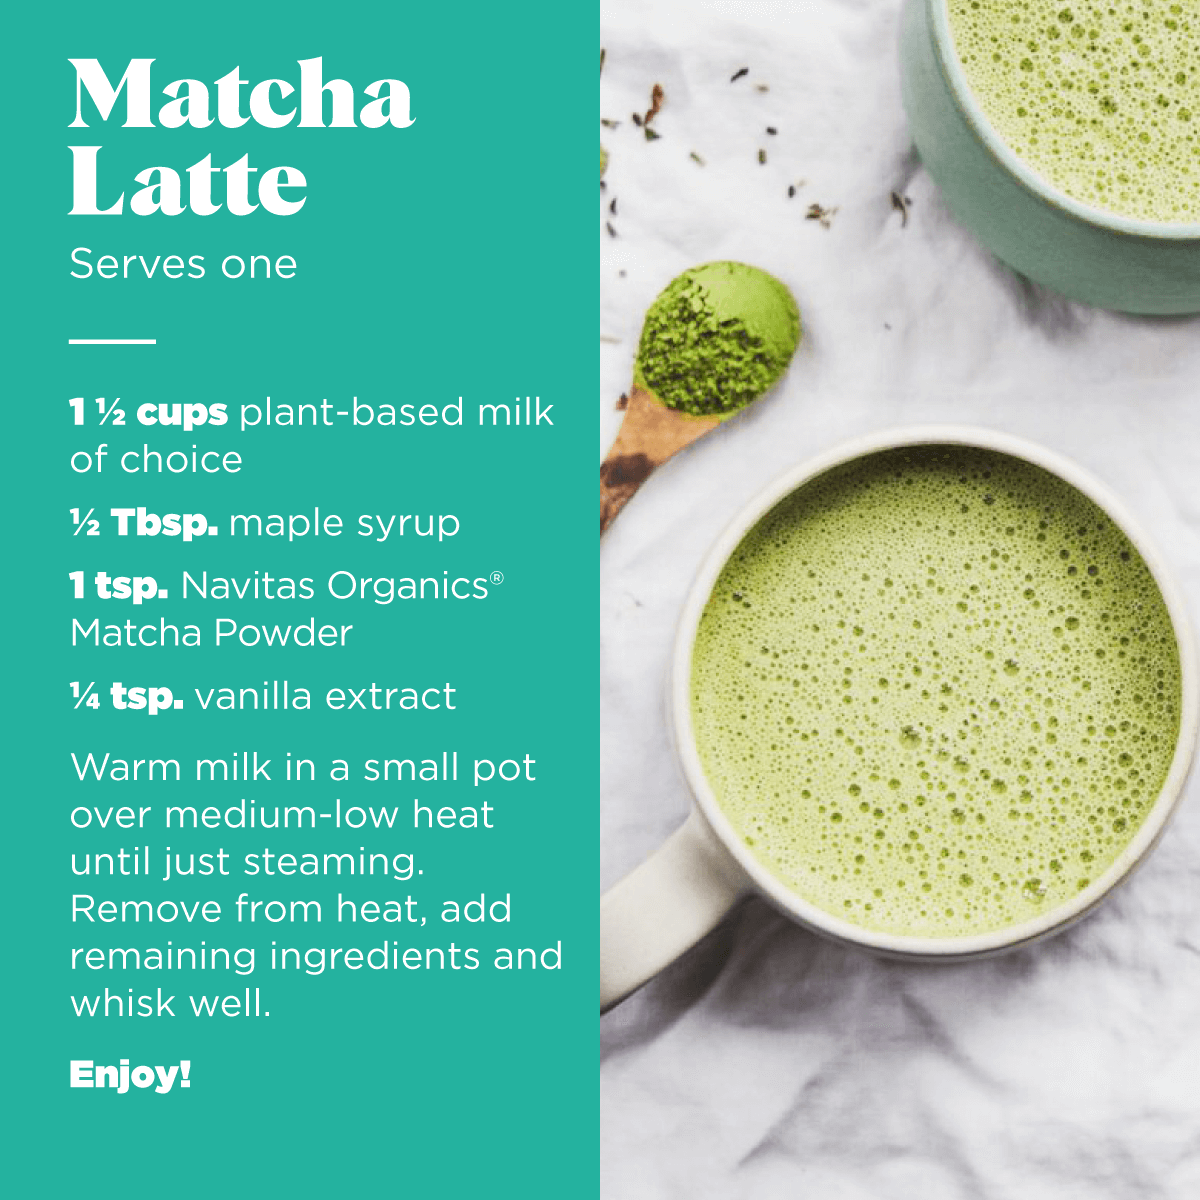 Keto Matcha 100% Japanese Matcha Nutrition Facts - Eat This Much